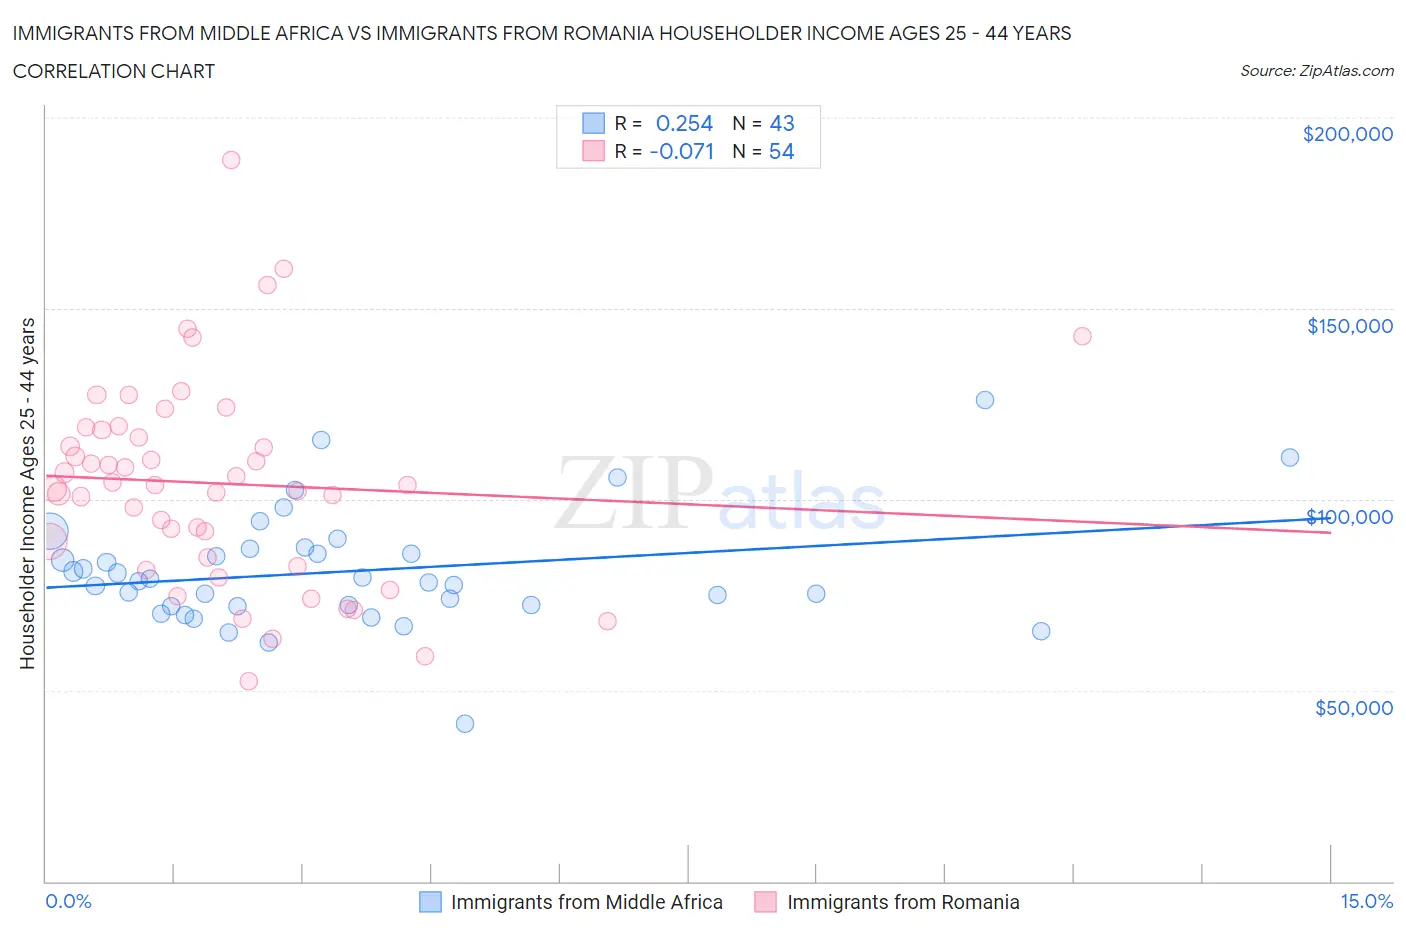 Immigrants from Middle Africa vs Immigrants from Romania Householder Income Ages 25 - 44 years